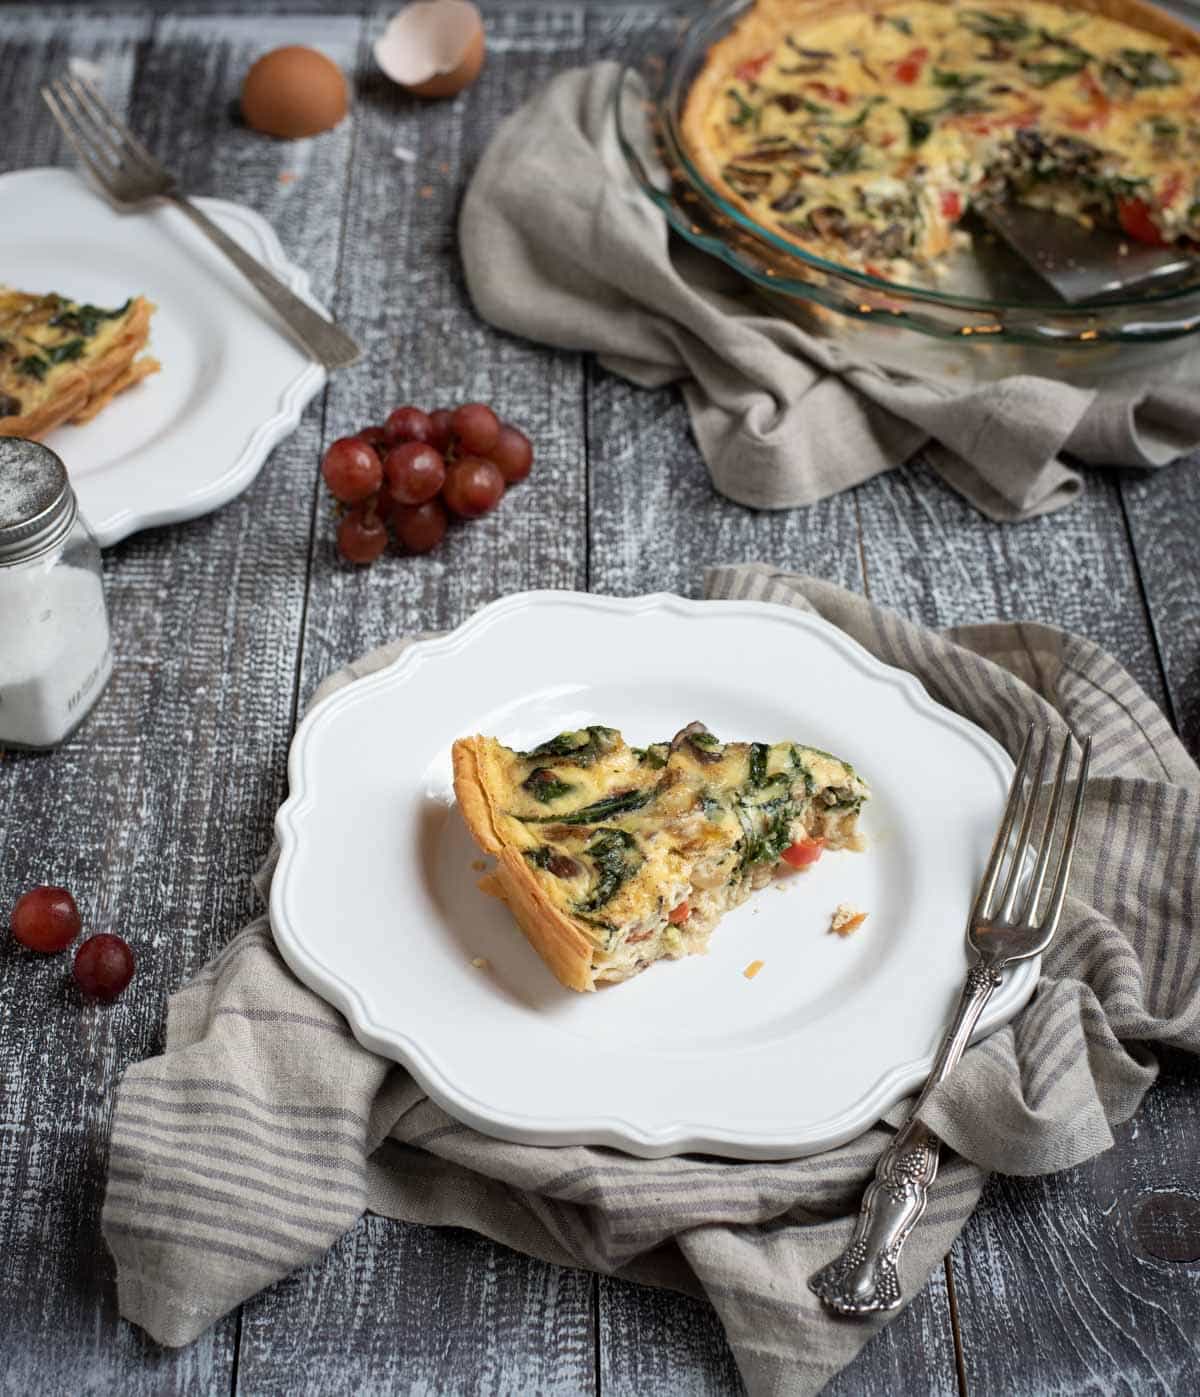 Plate with vegetable quiche slice